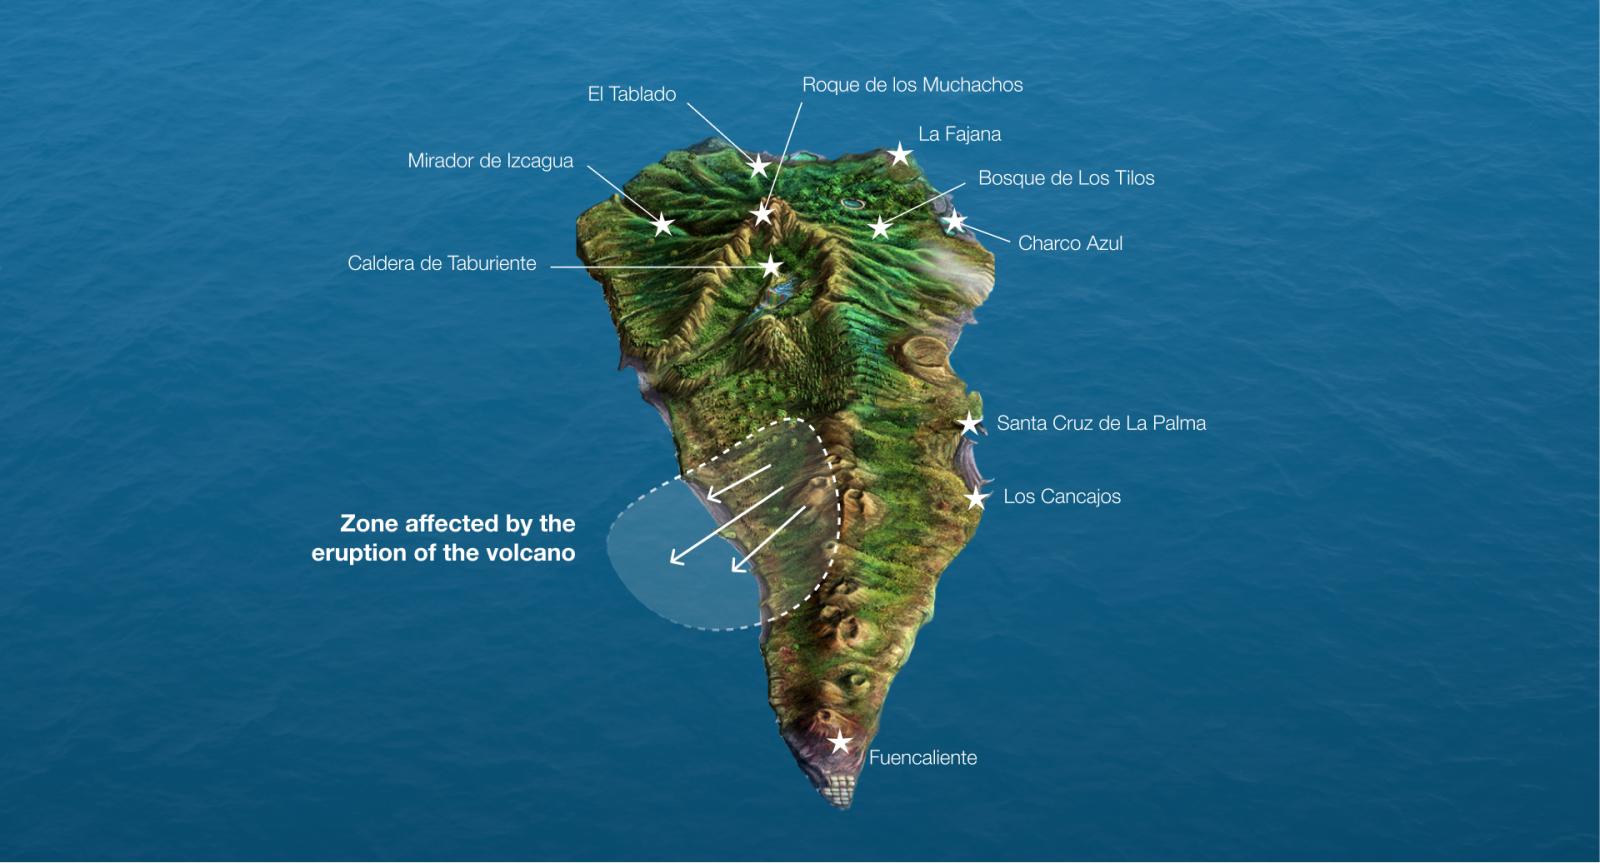 Accessible areas of interest and impact, island of La Palma